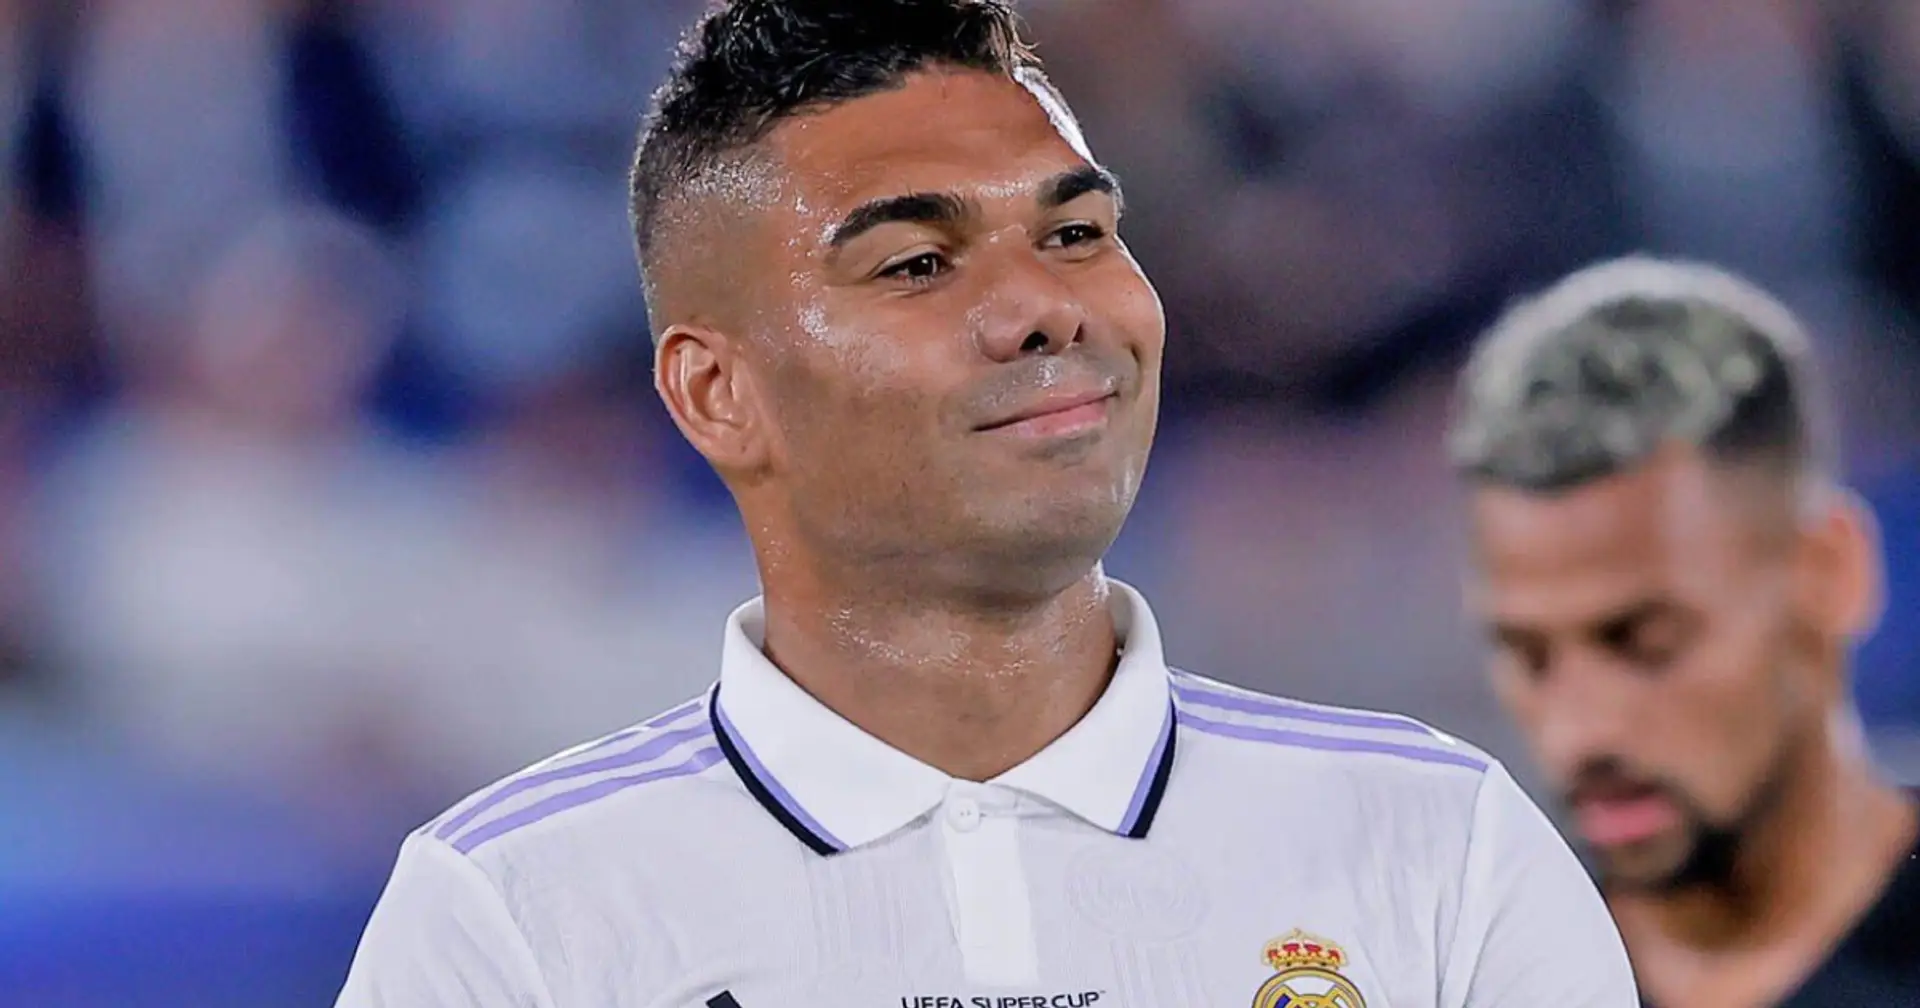 Casemiro leaves Real Madrid and 3 more big stories you might've missed